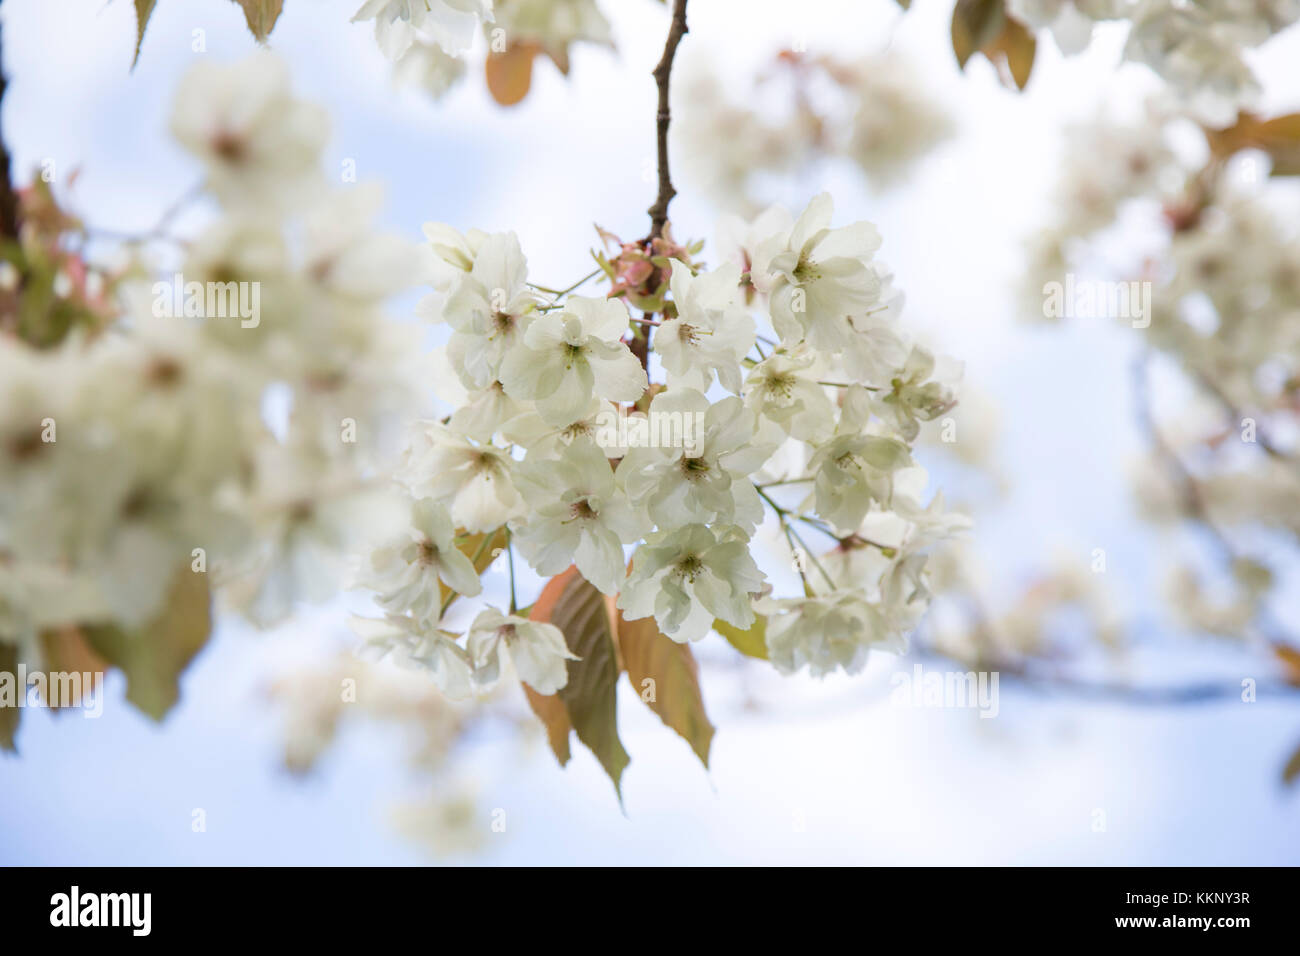 White cherry blossom on a cherry tree in an english garden against a blue sky at spring time Stock Photo